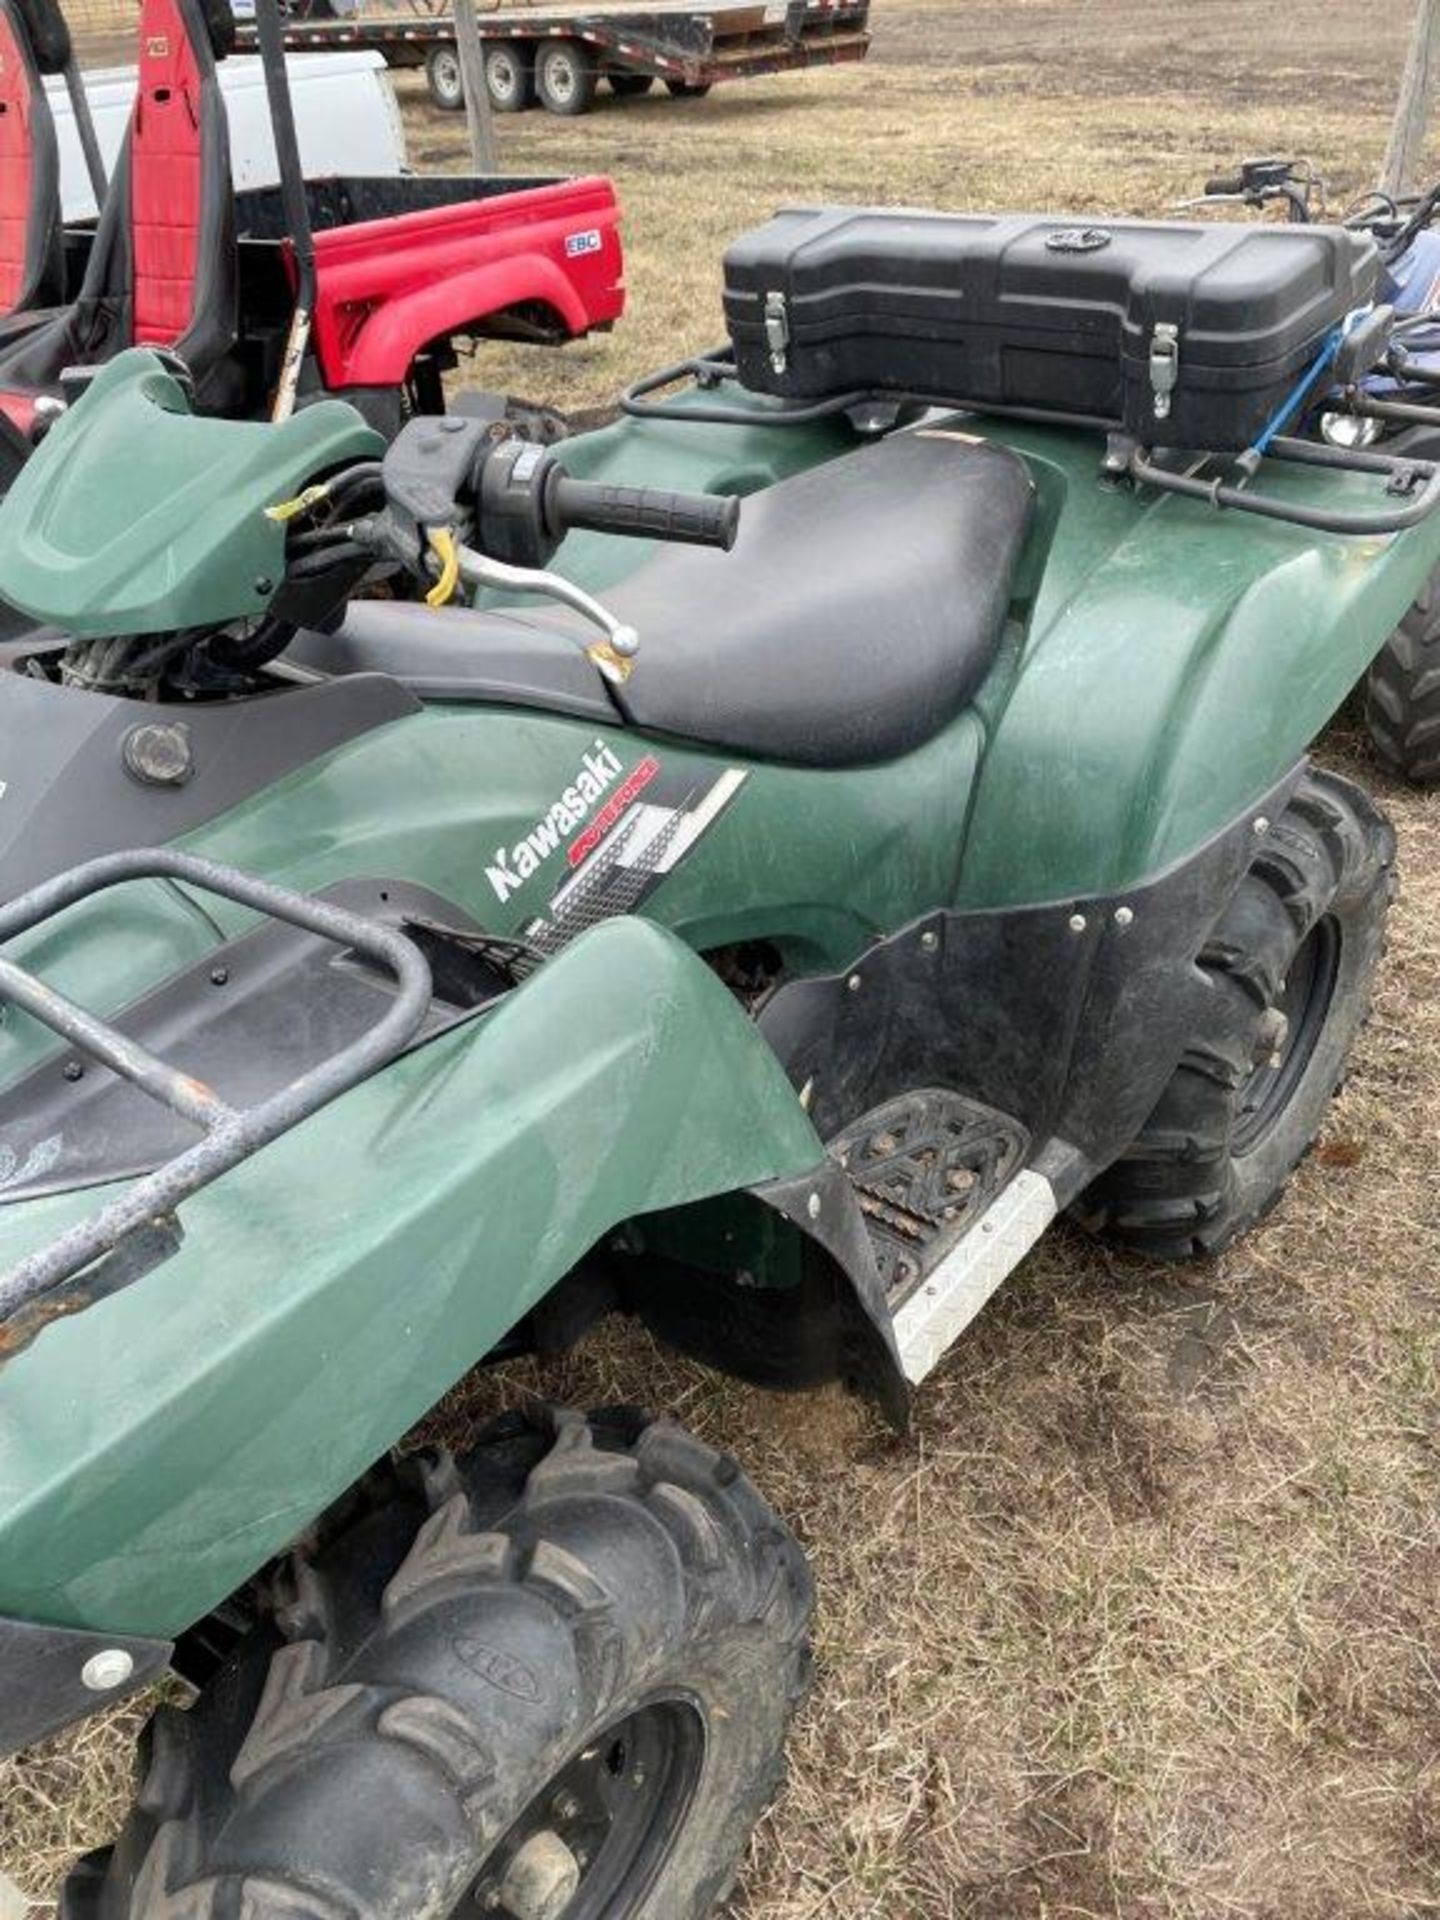 2007 KAWASAKI BRUTE FORCE 750 ATV 4X4 AUTO, RECENT CARB CLEAN, NEW BATTERY, 1762 KM'S SHOWING - Image 11 of 19